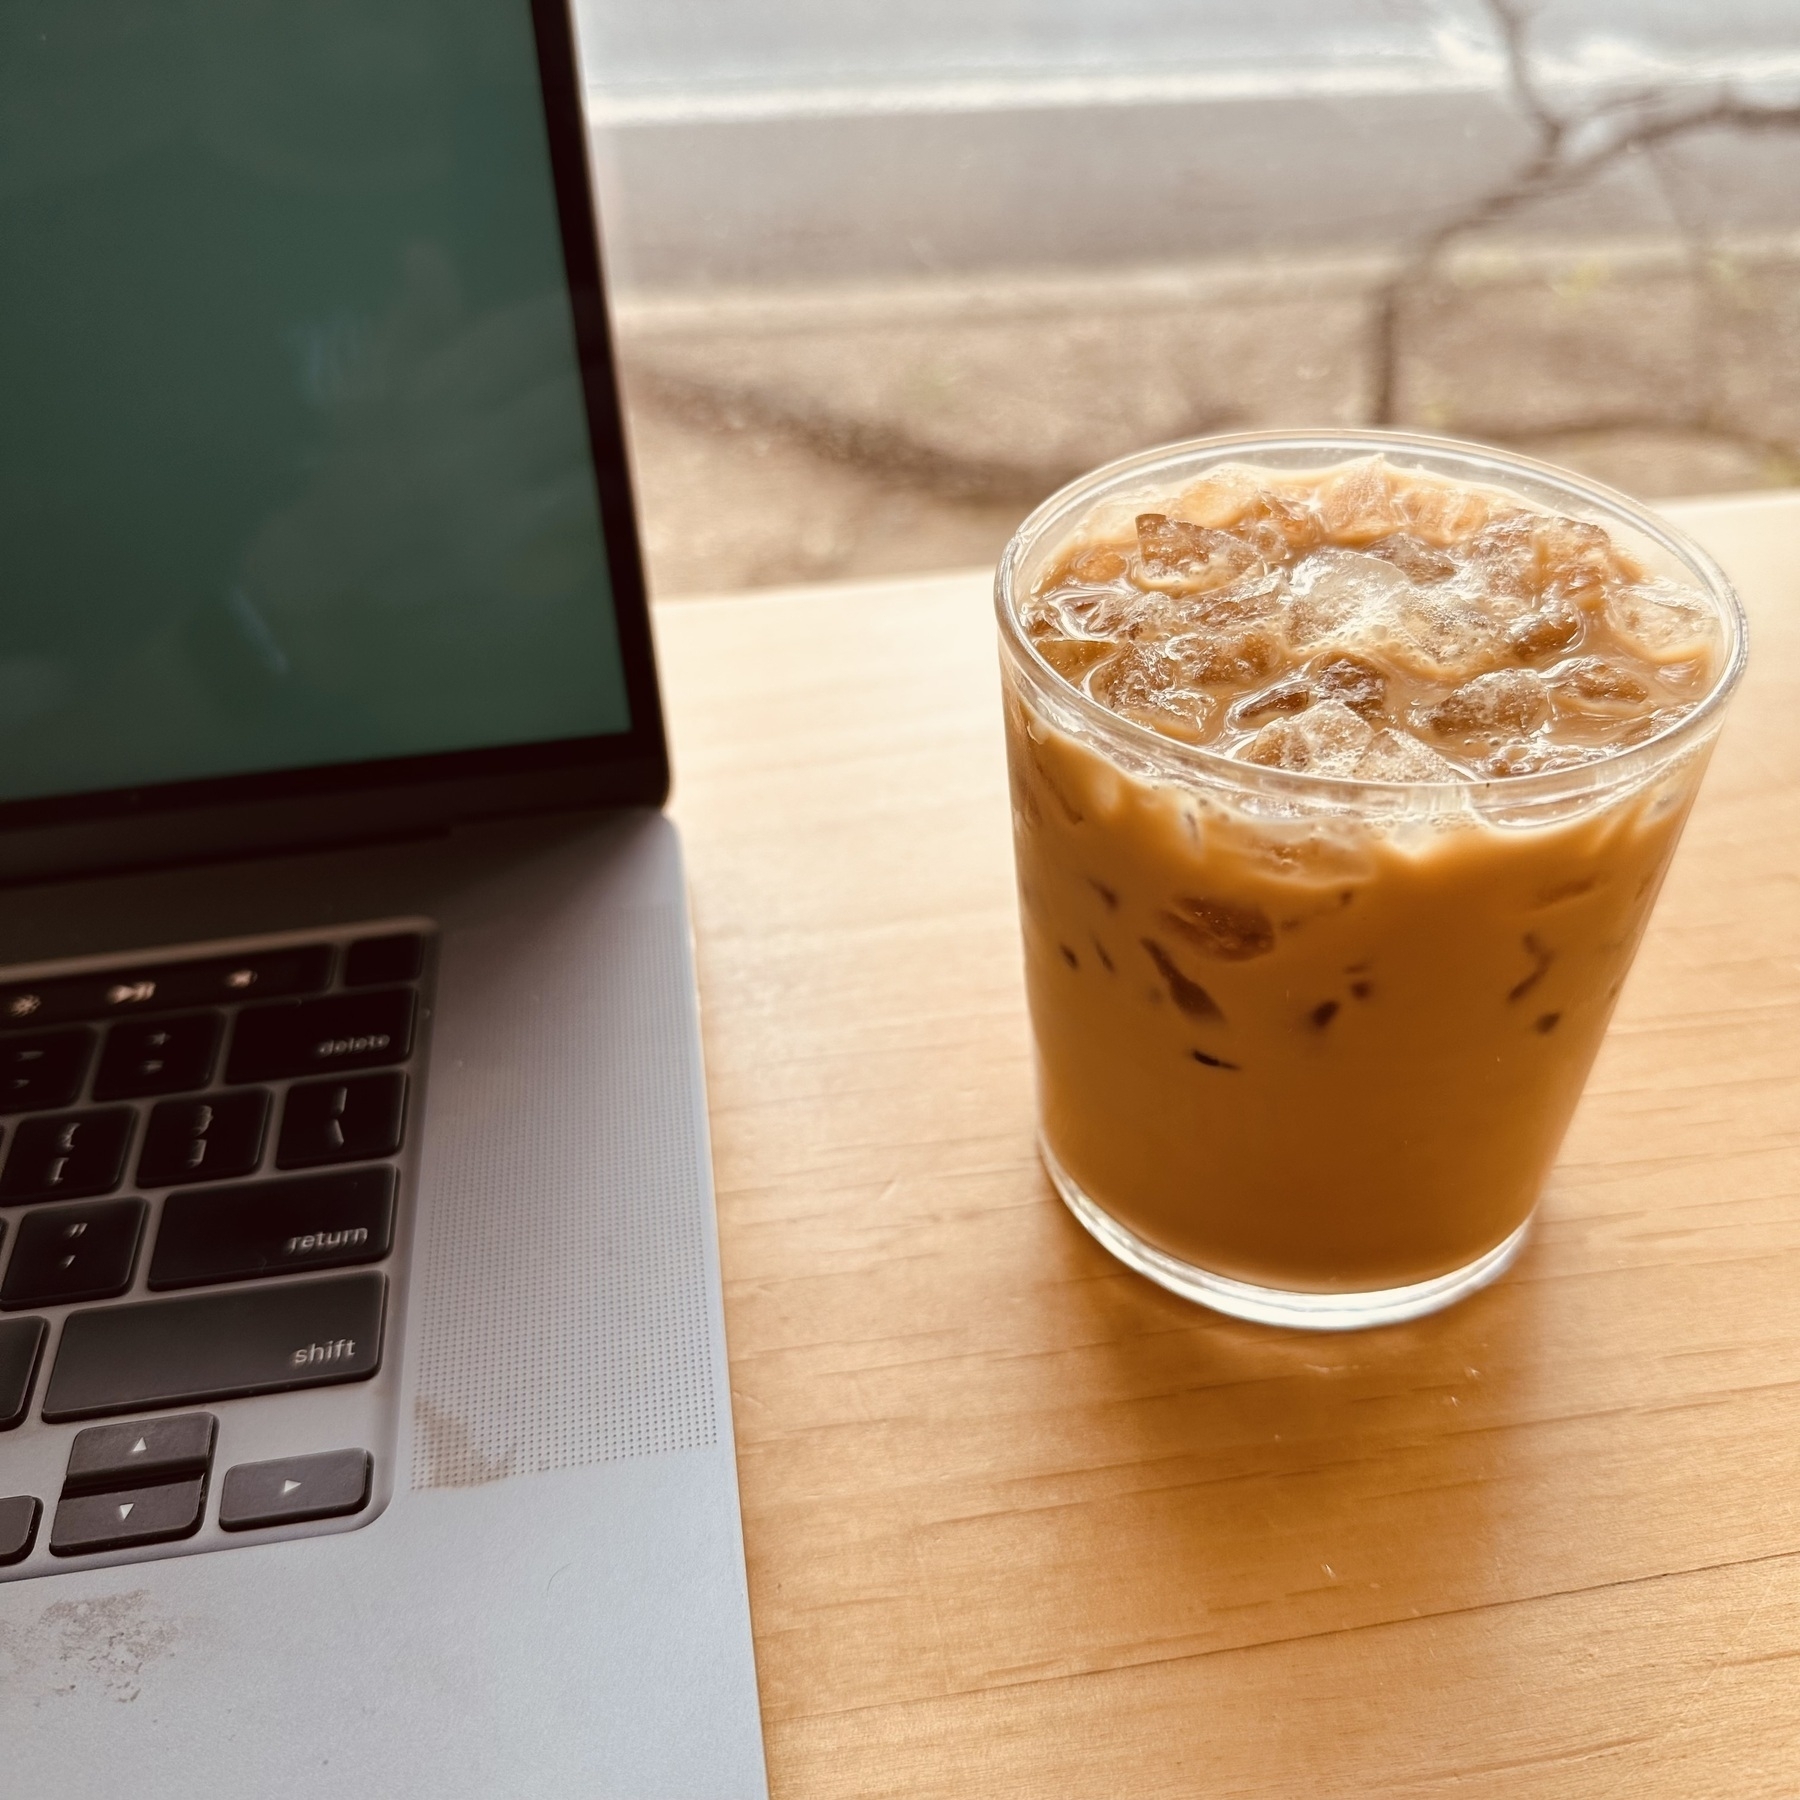 Photo of my laptop and iced coffee, Guadalupe Street in background.